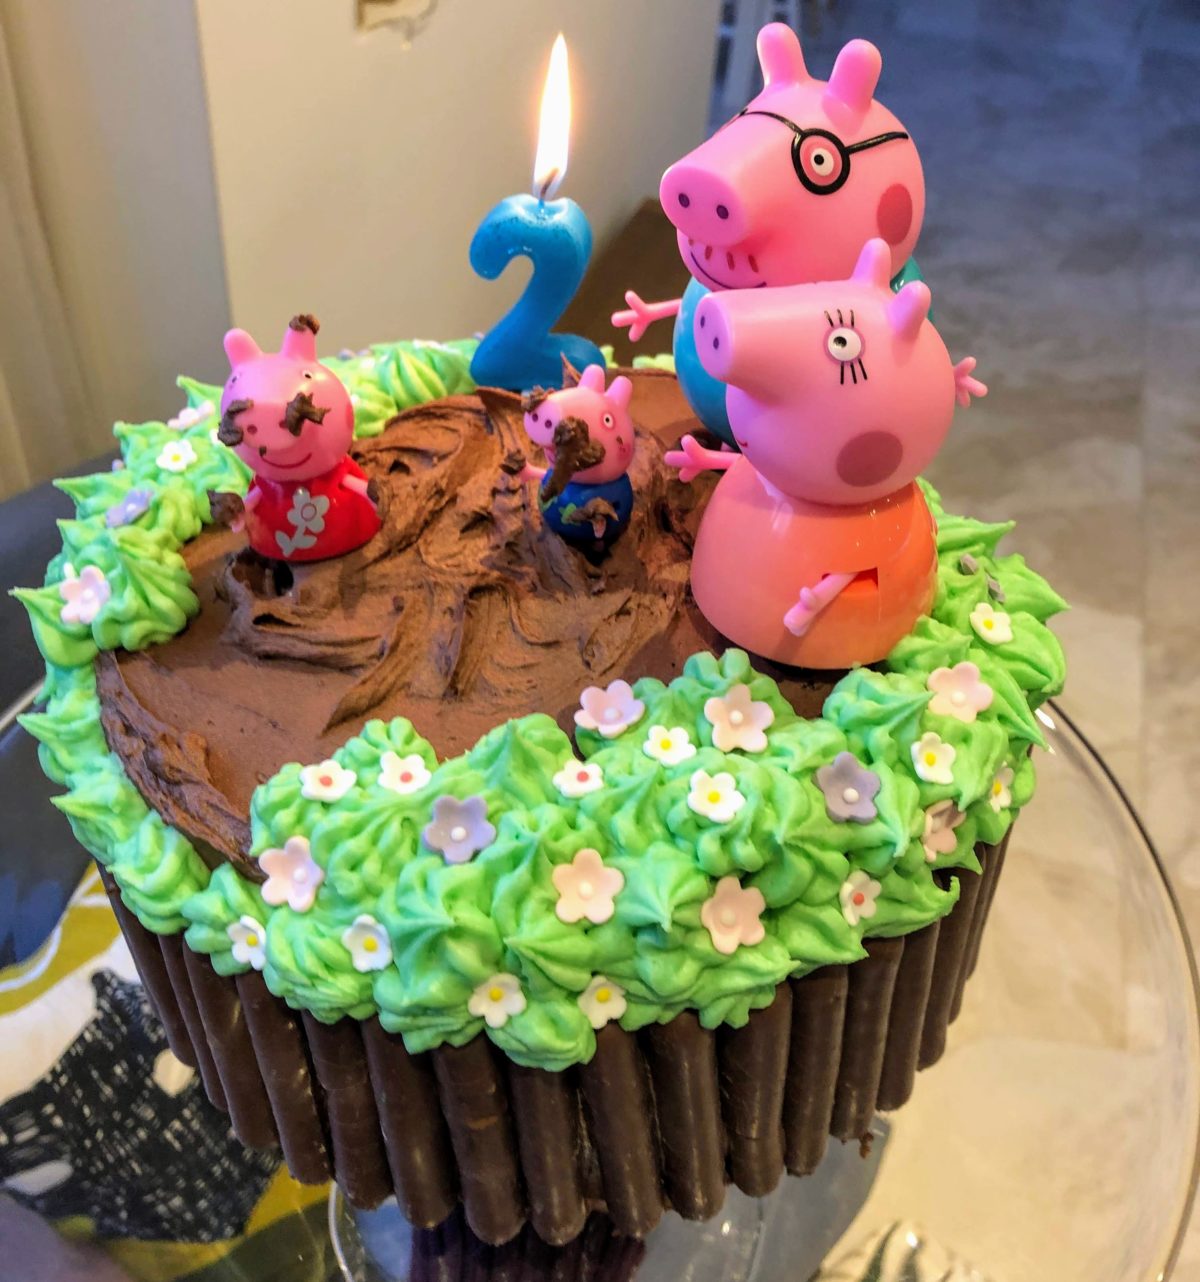 The amazing Peppa Pig cake baked by my wife